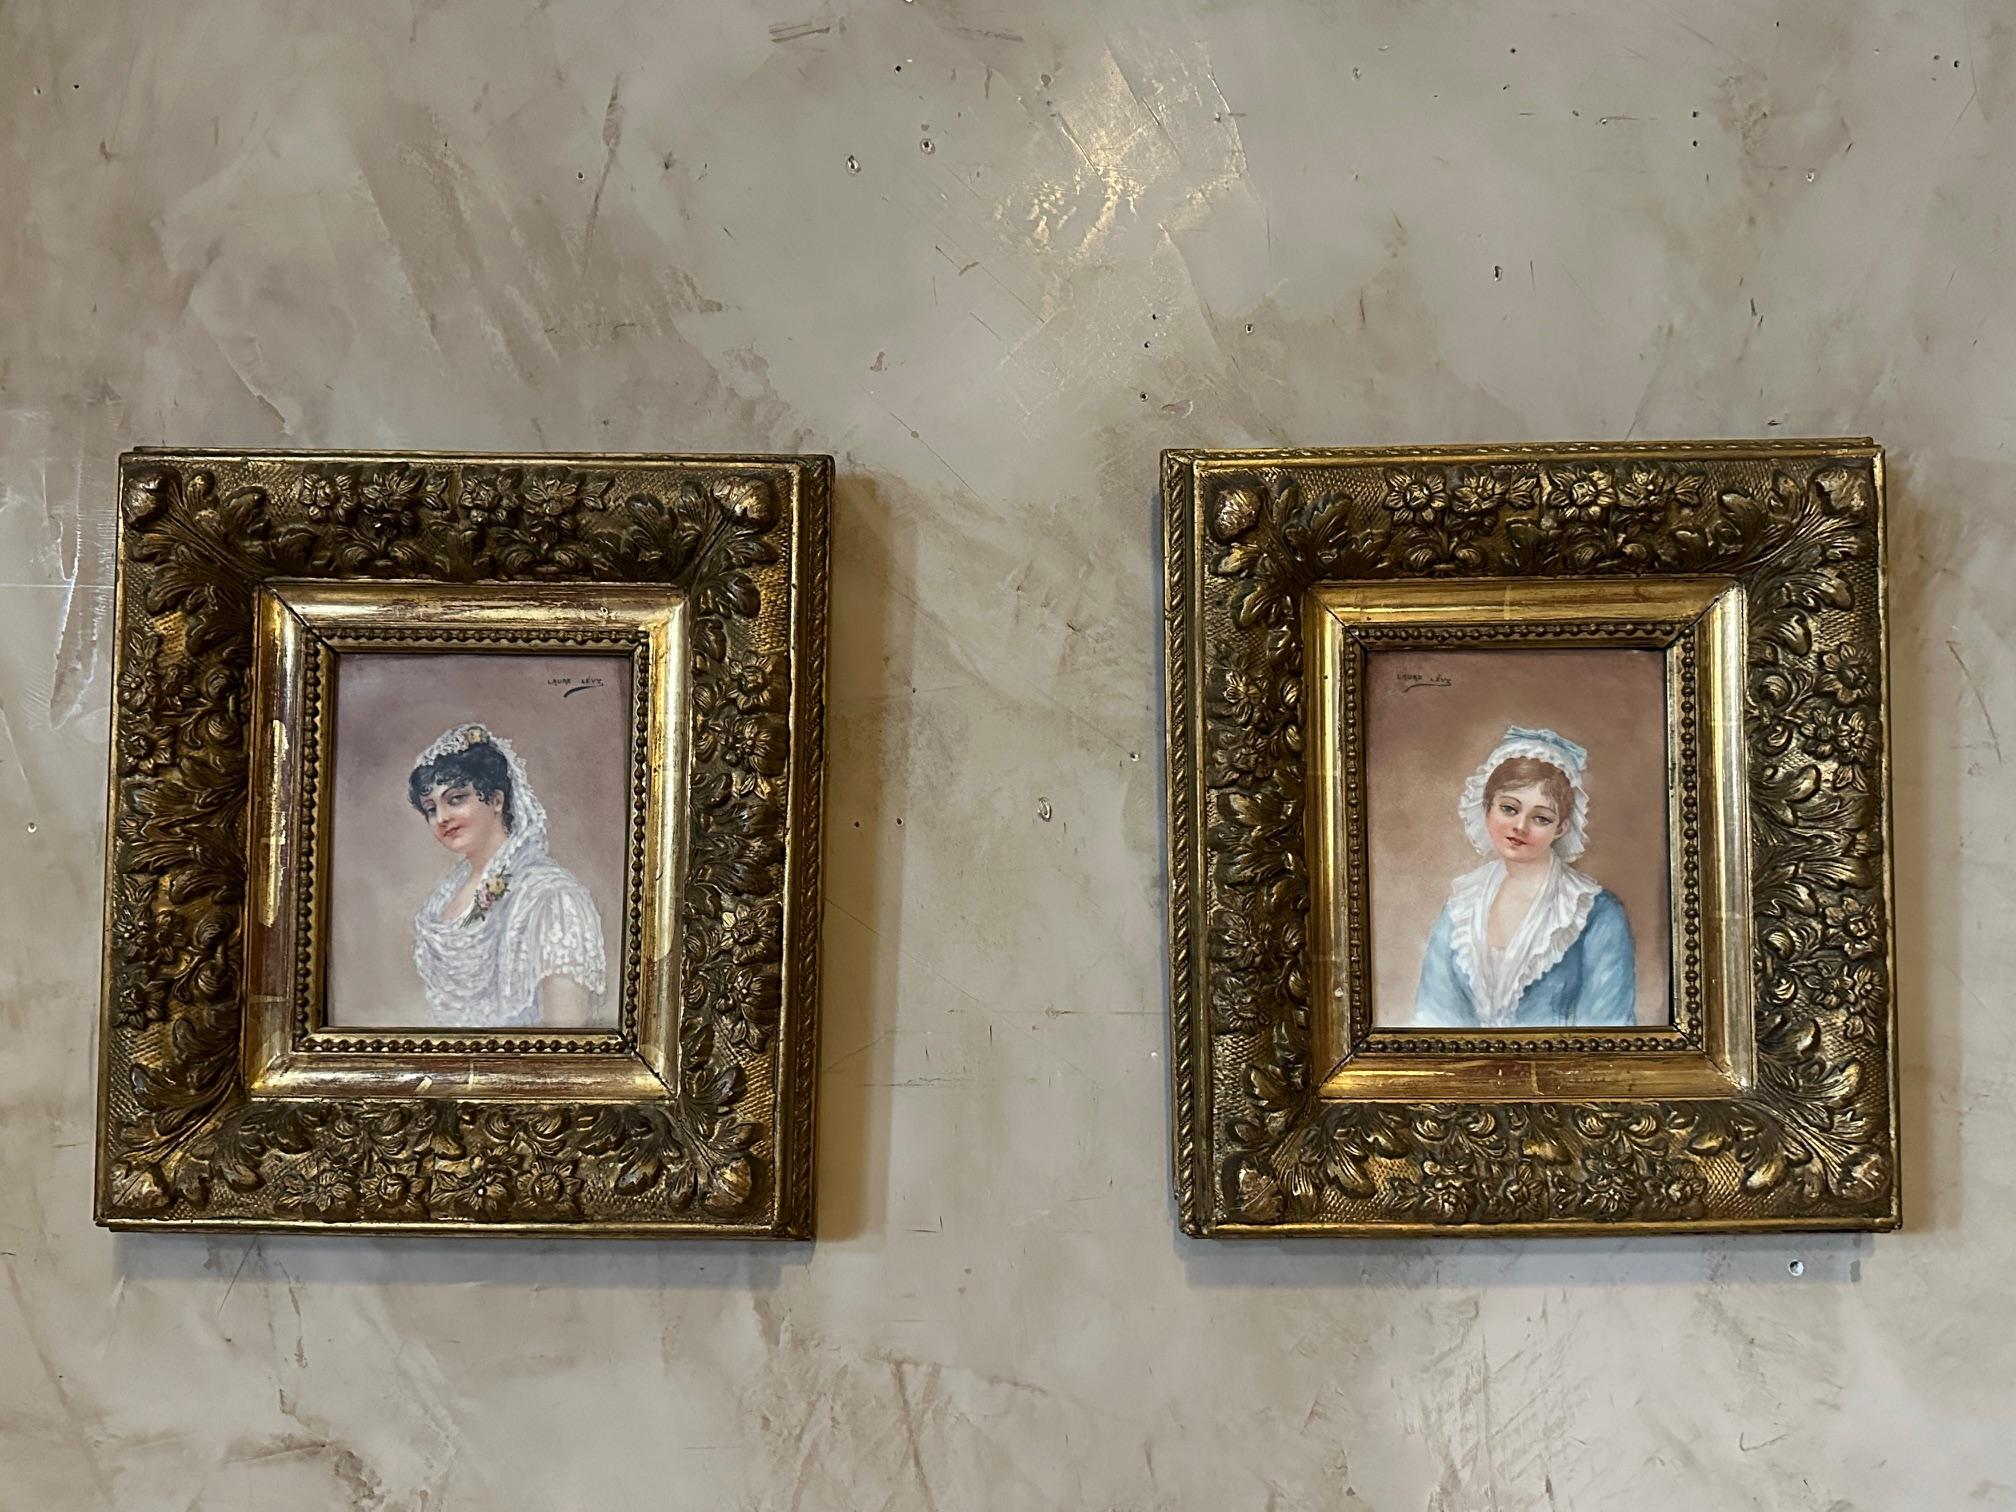 Pair of oil portraits on porcelain dating from the 19th century signed by Laure Lévy representing two young women. 
Beautiful gilded wood frame.
Laure LEVY is an artist born in France in 1866 and died in 1954.